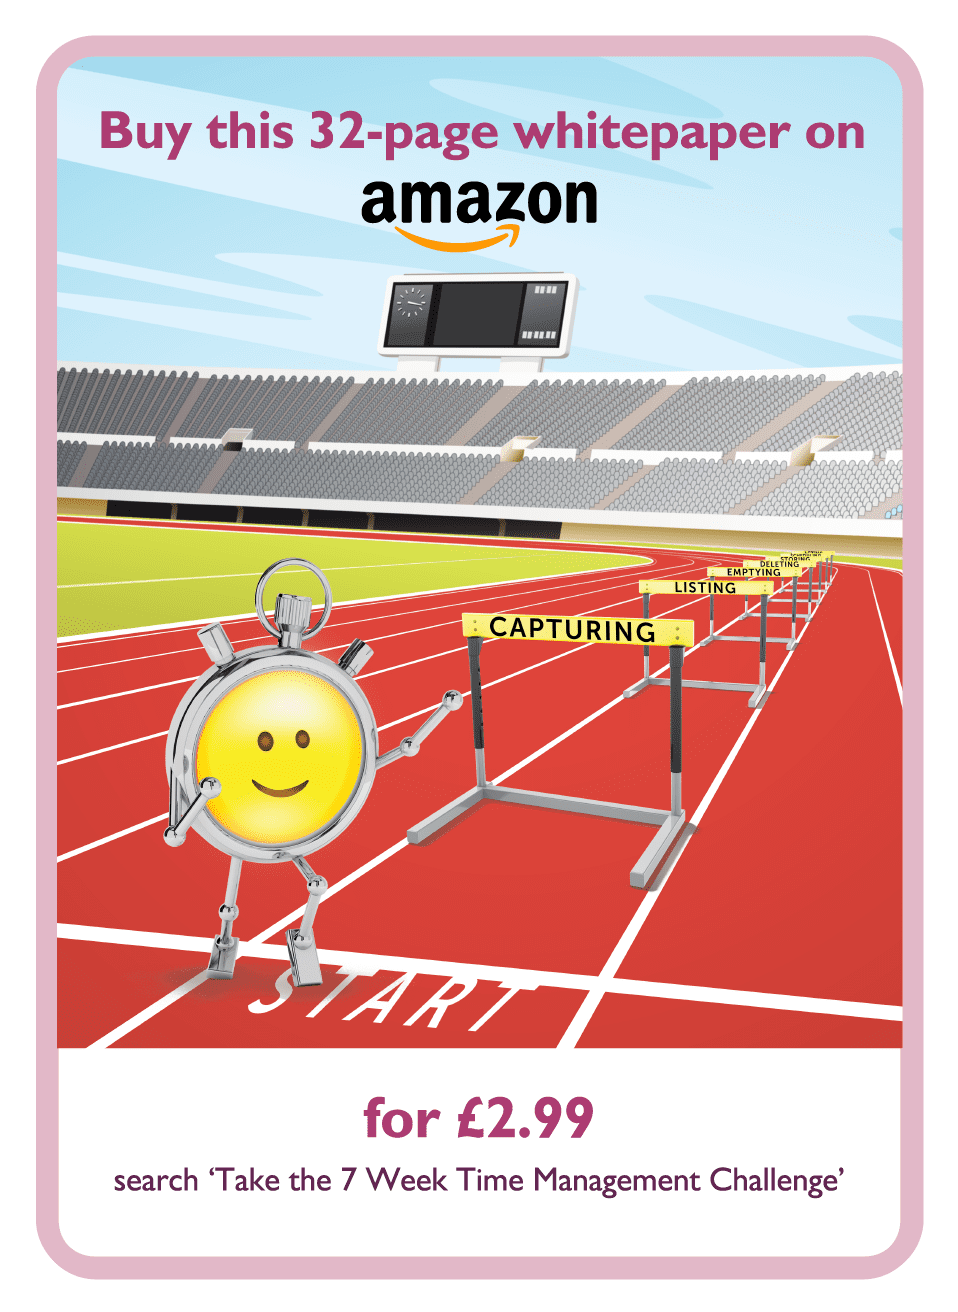 Time management coaching card showing 7 hurdles and a stopwatch